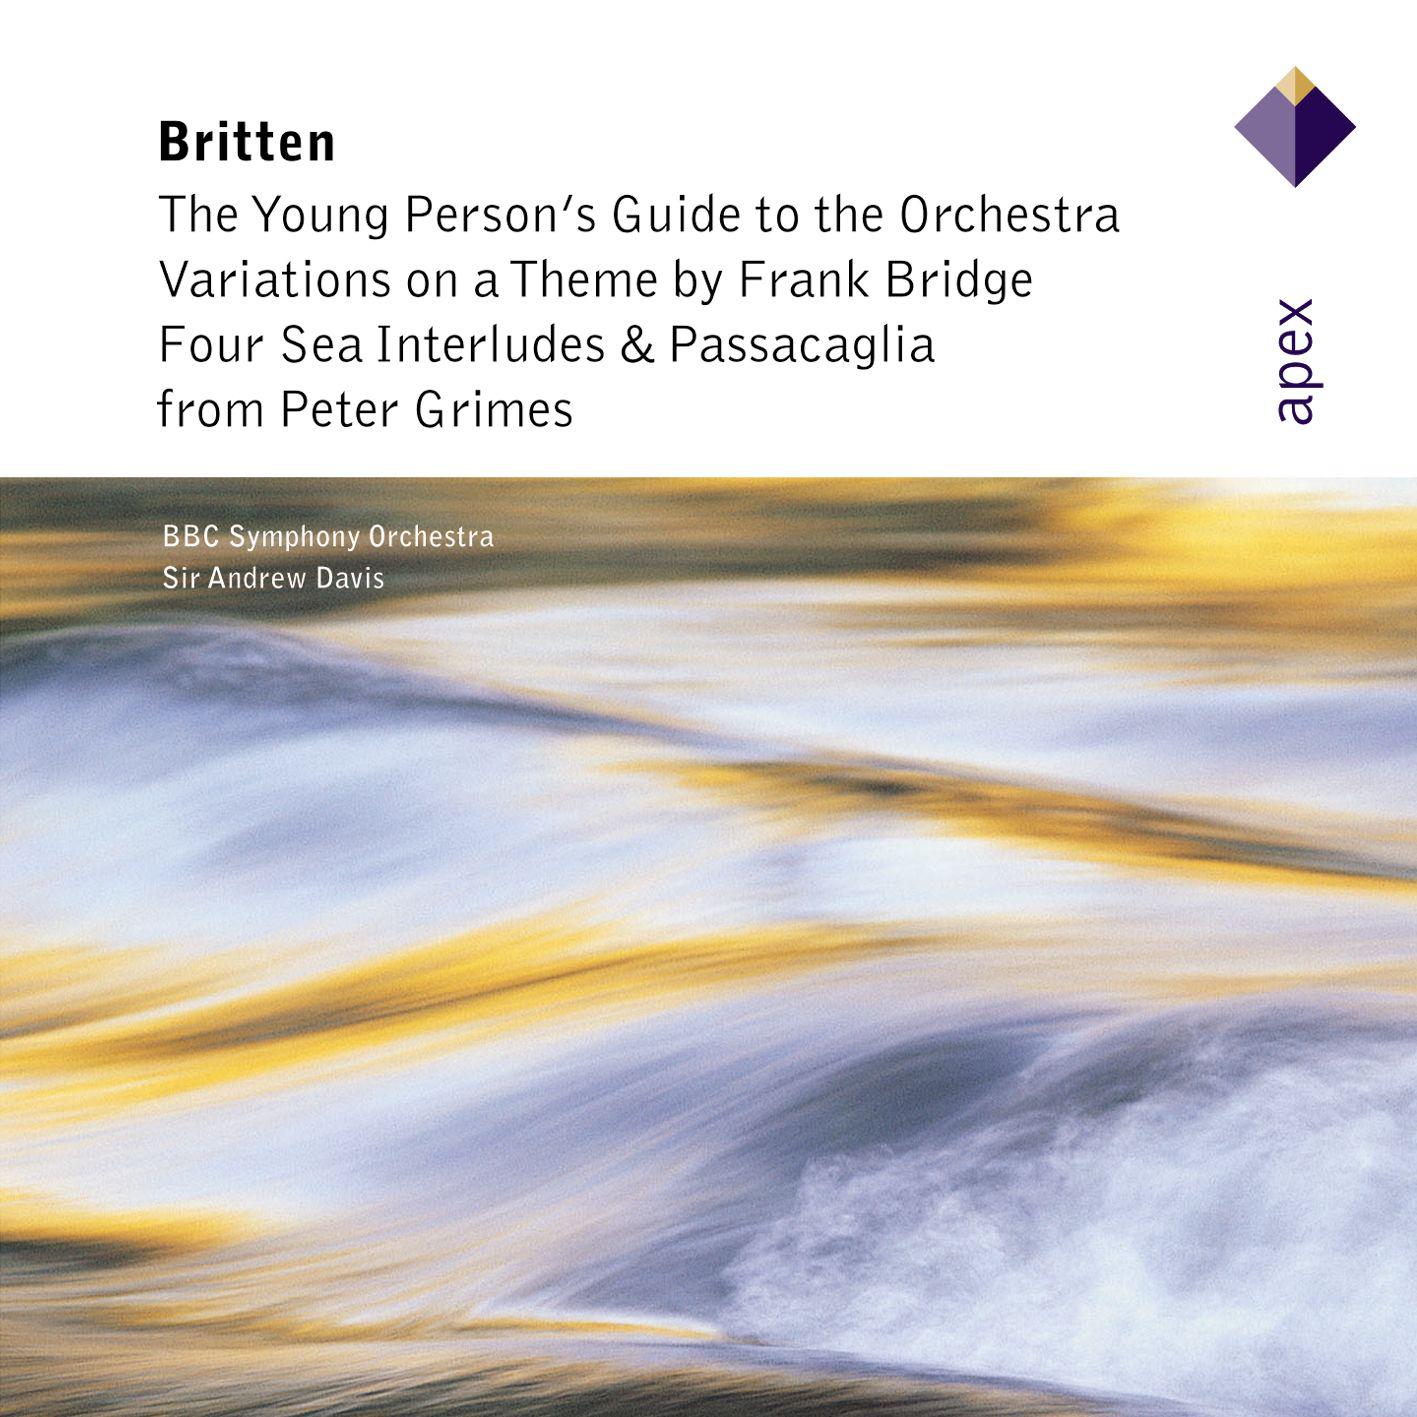 Variations on a Theme by Frank Bridge, Op. 10: IX. Funeral March